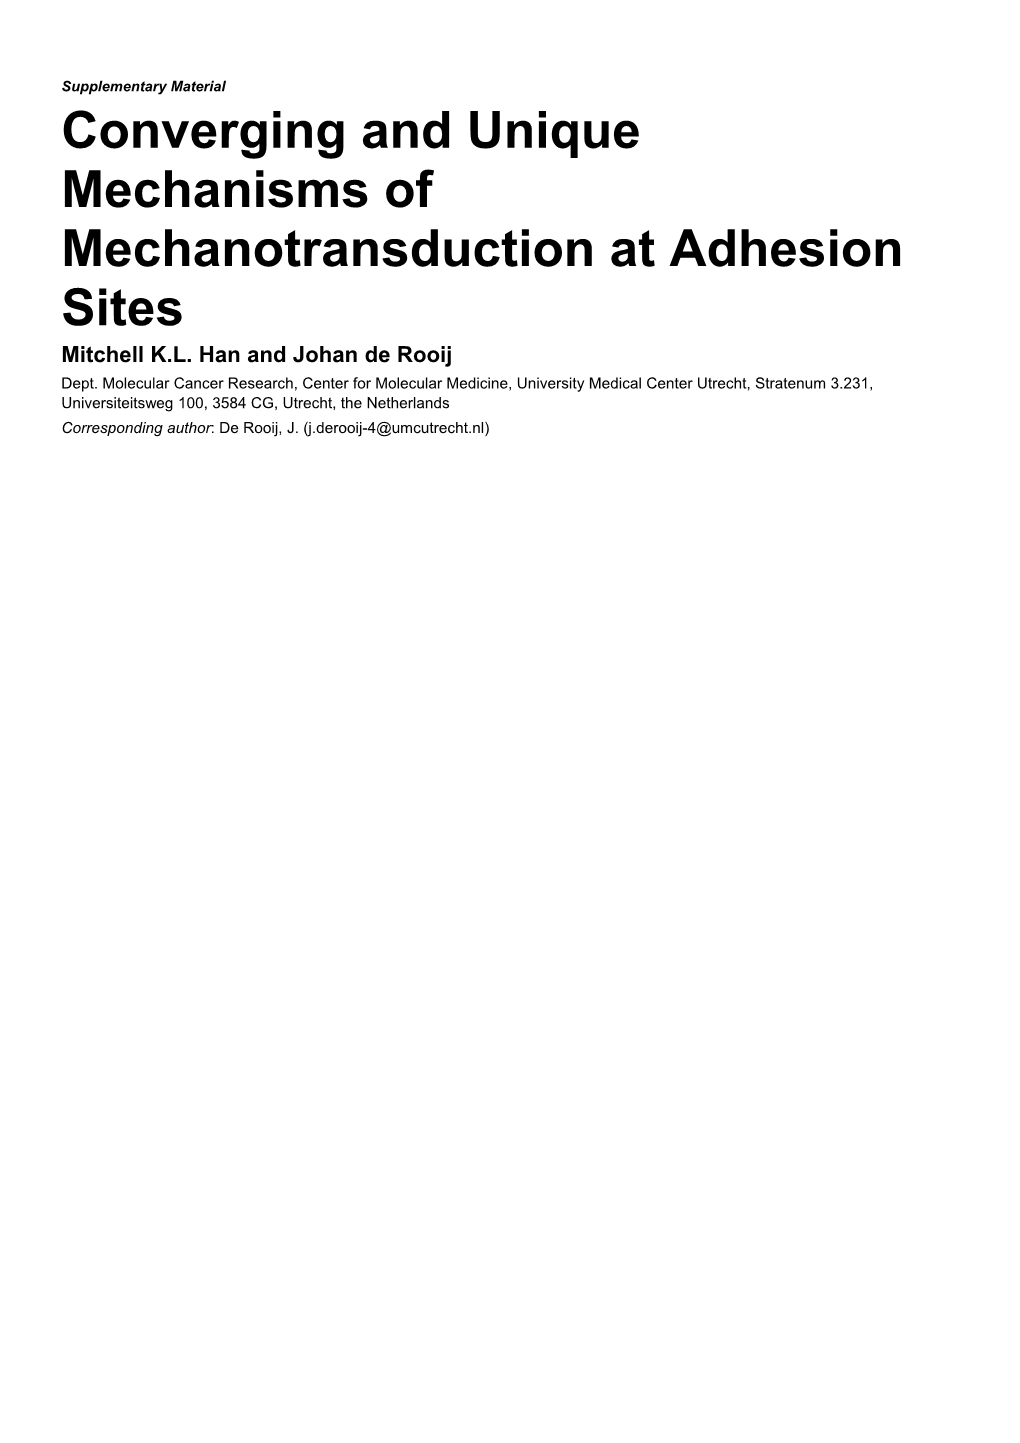 Converging and Unique Mechanisms of Mechanotransduction at Adhesion Sites